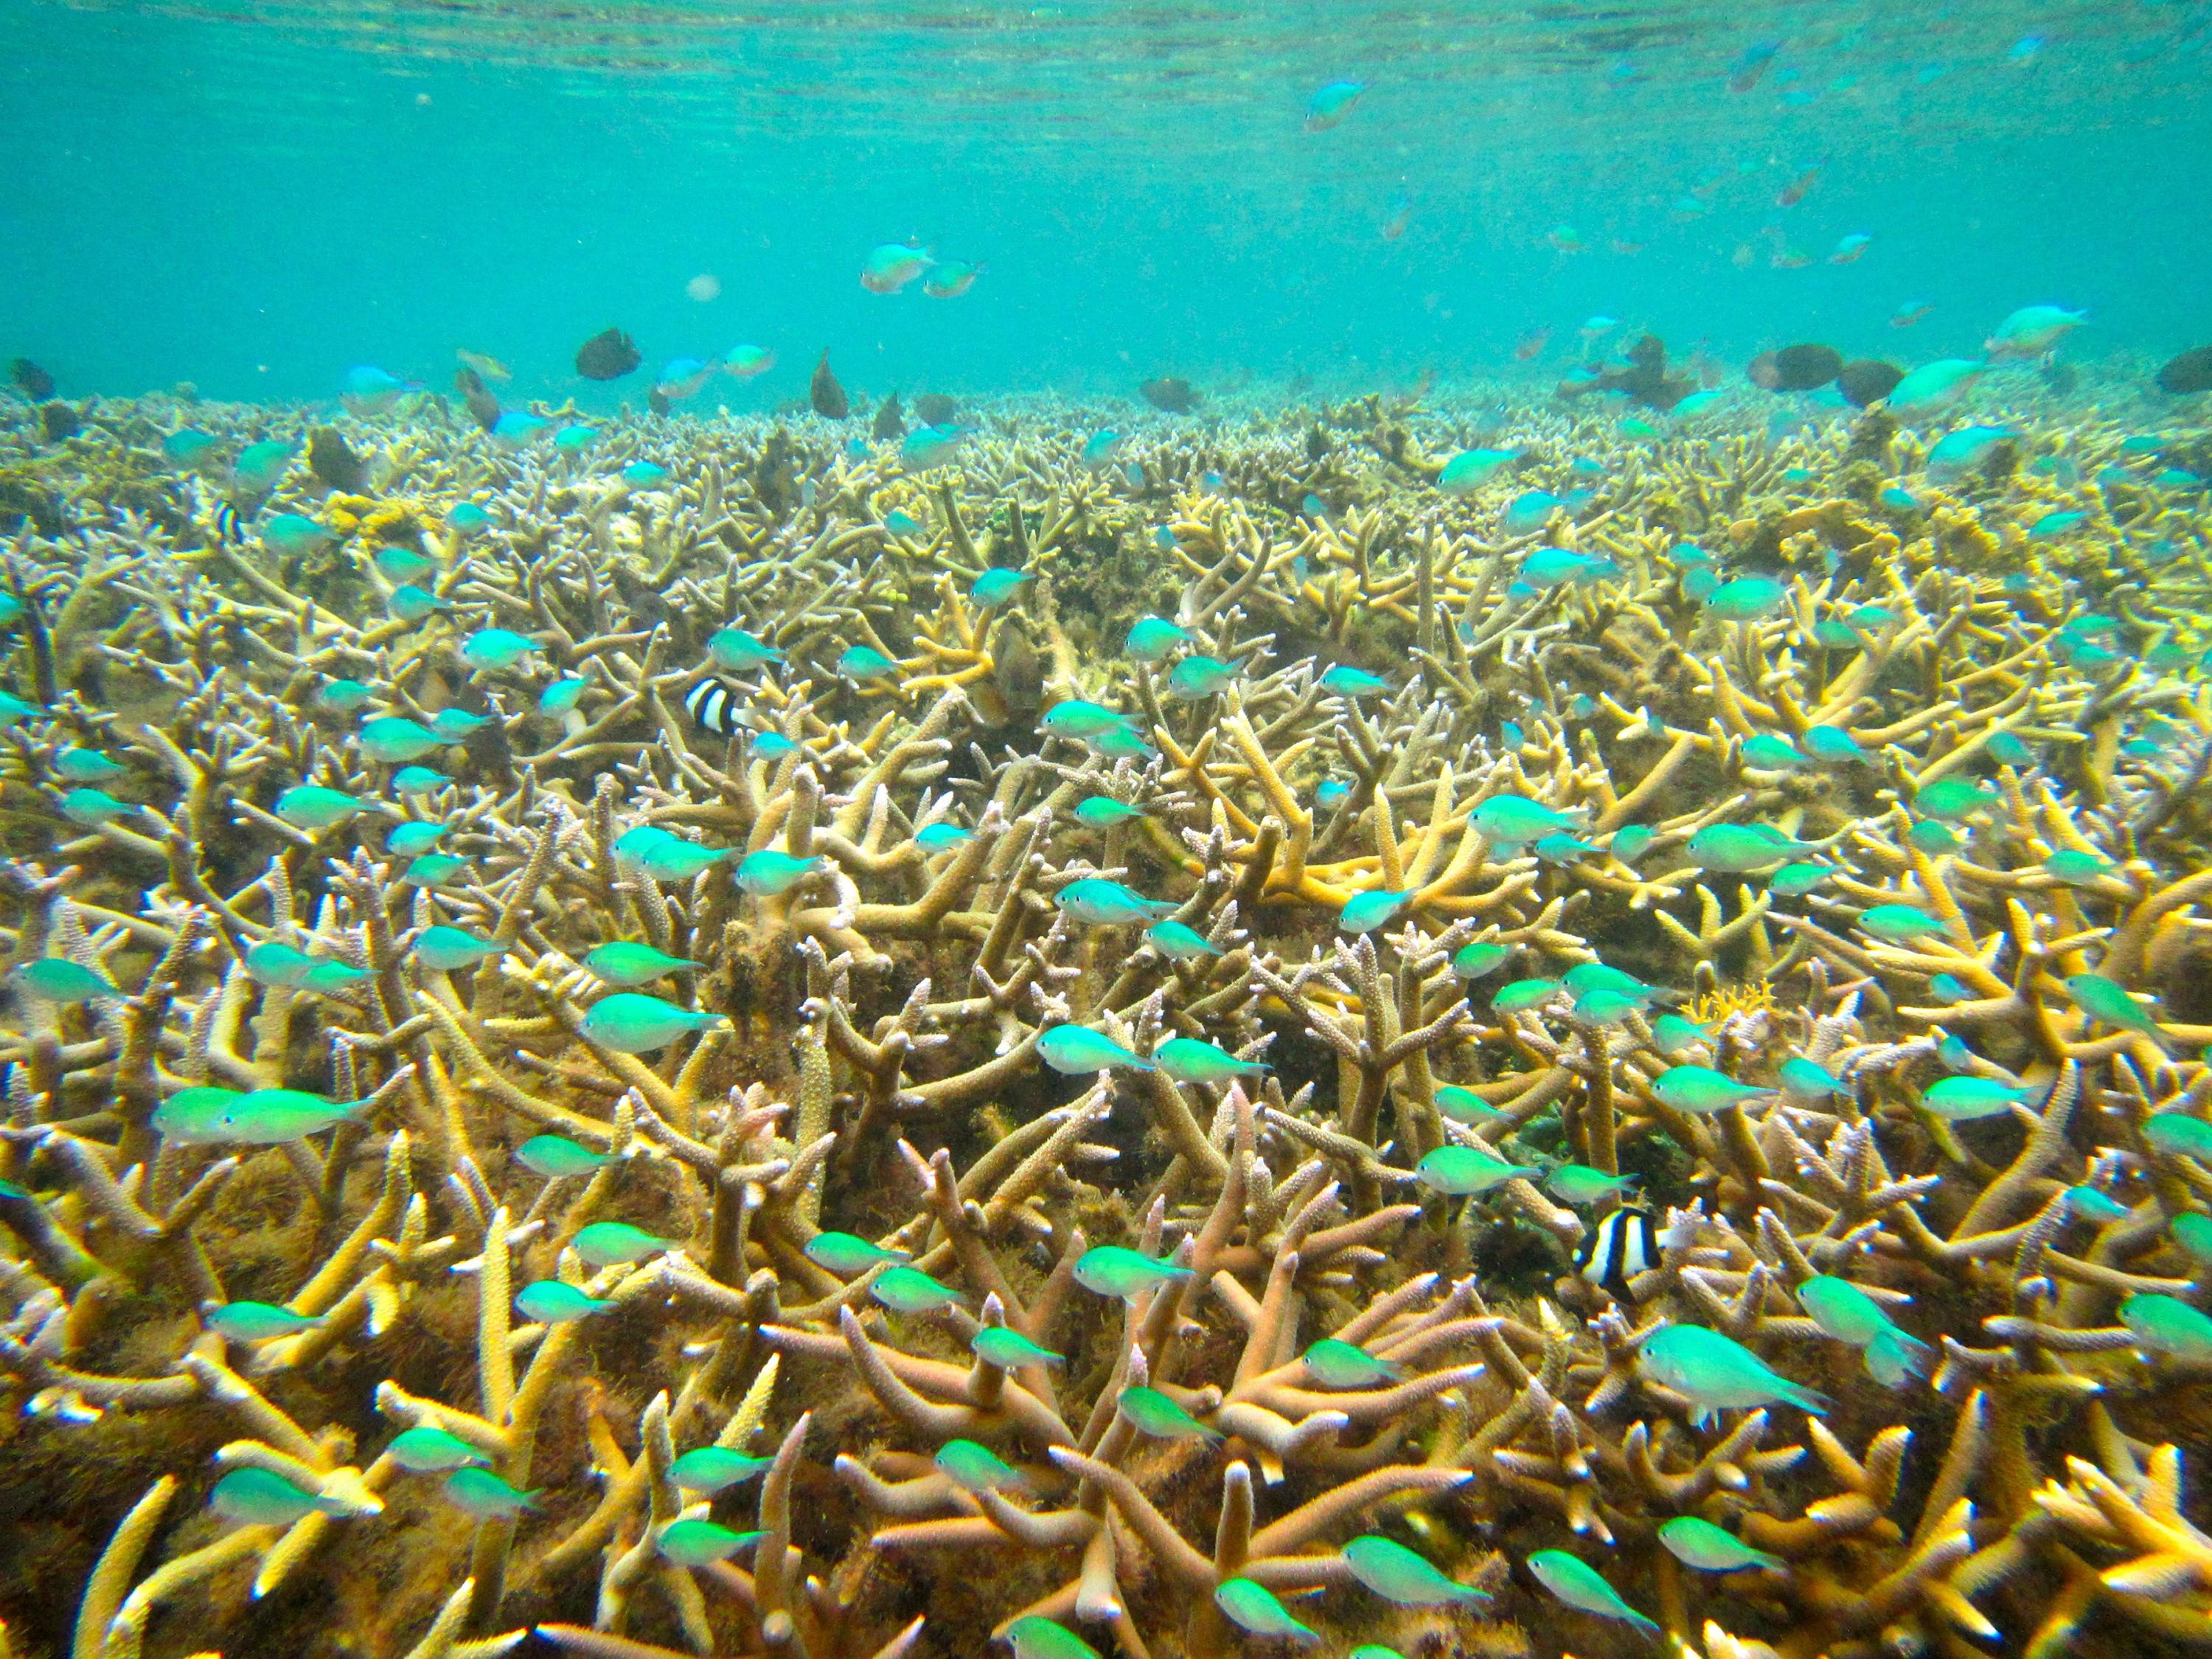 Fishes and healthy coral show the benefits of marine protected areas designed to protect reef ecosystems. (Credit: Cody Clements, Georgia Tech)